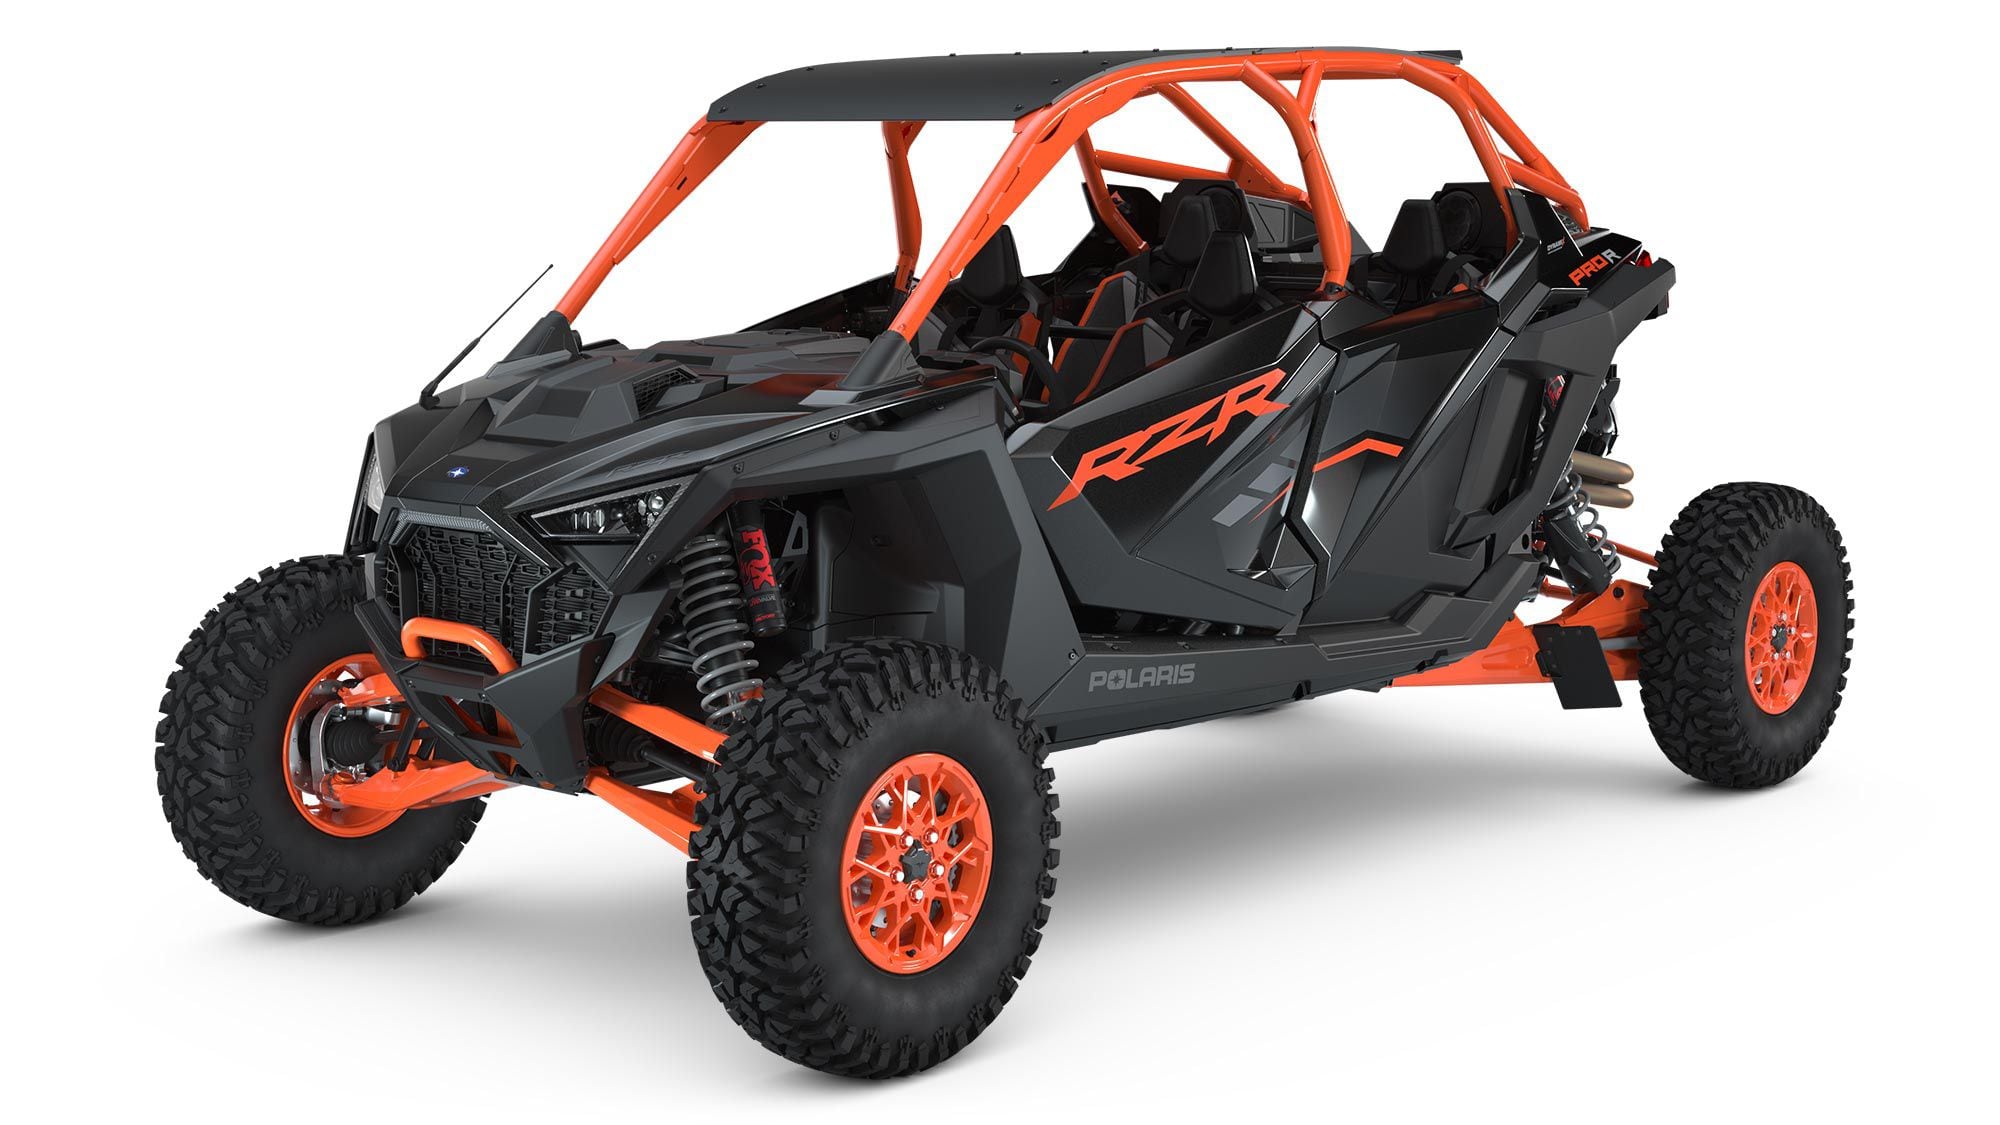 Polaris’ new RZR Pro R promises world-beating performance, but we have yet to drive one at the time of writing this.